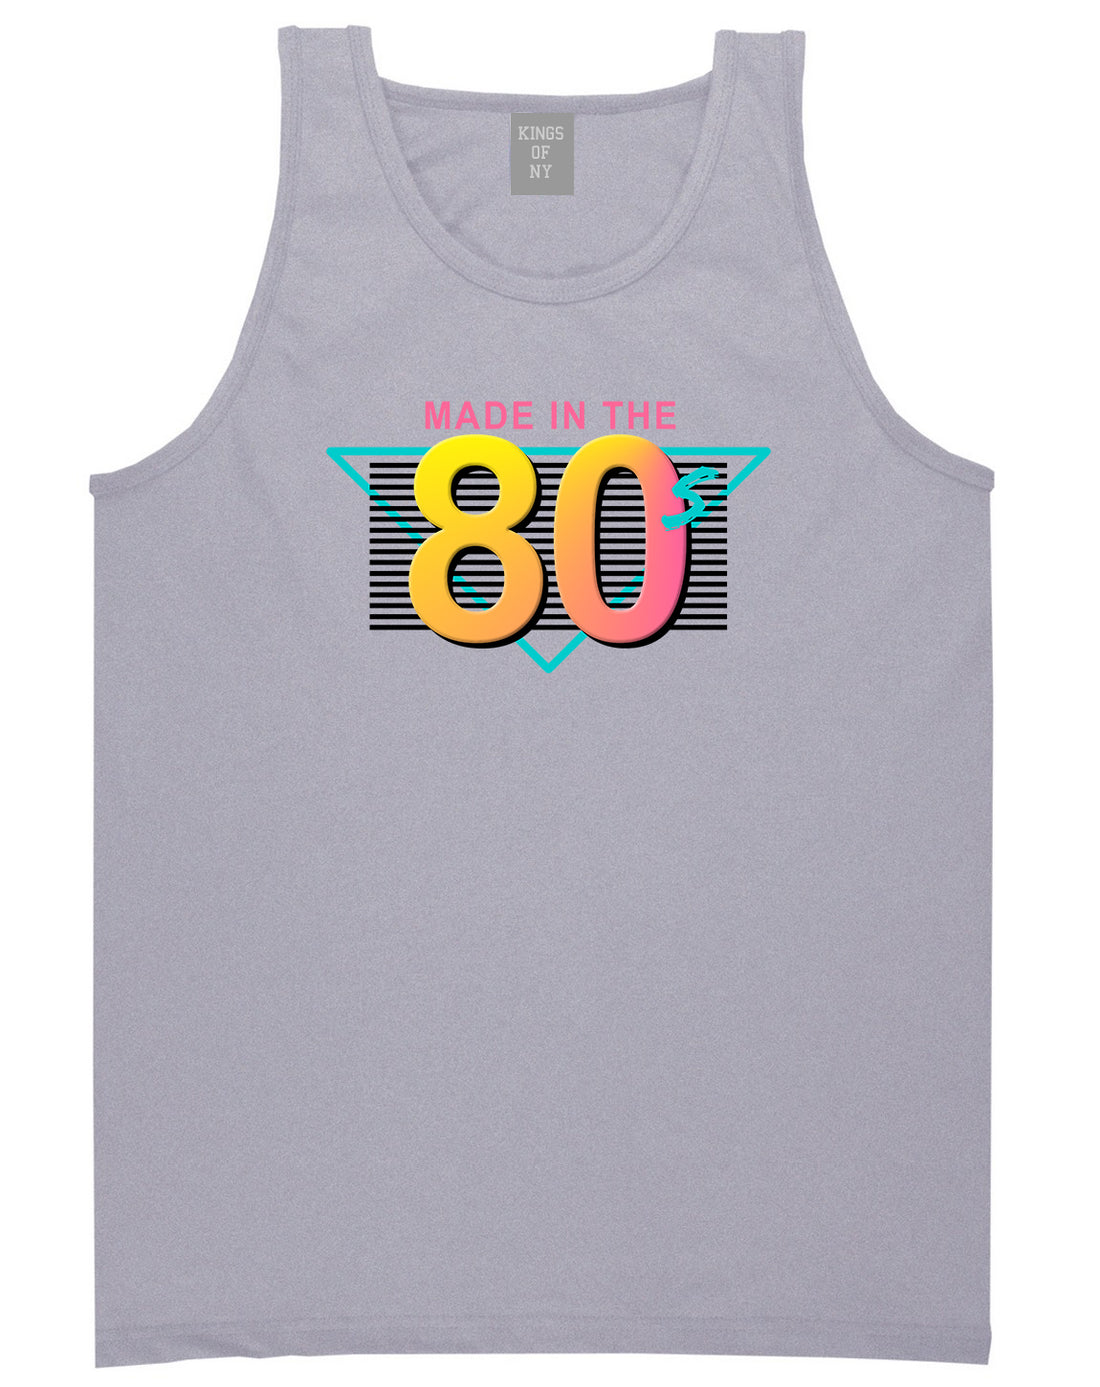 Made In The 80s Retro Mens Tank Top Shirt Grey by Kings Of NY